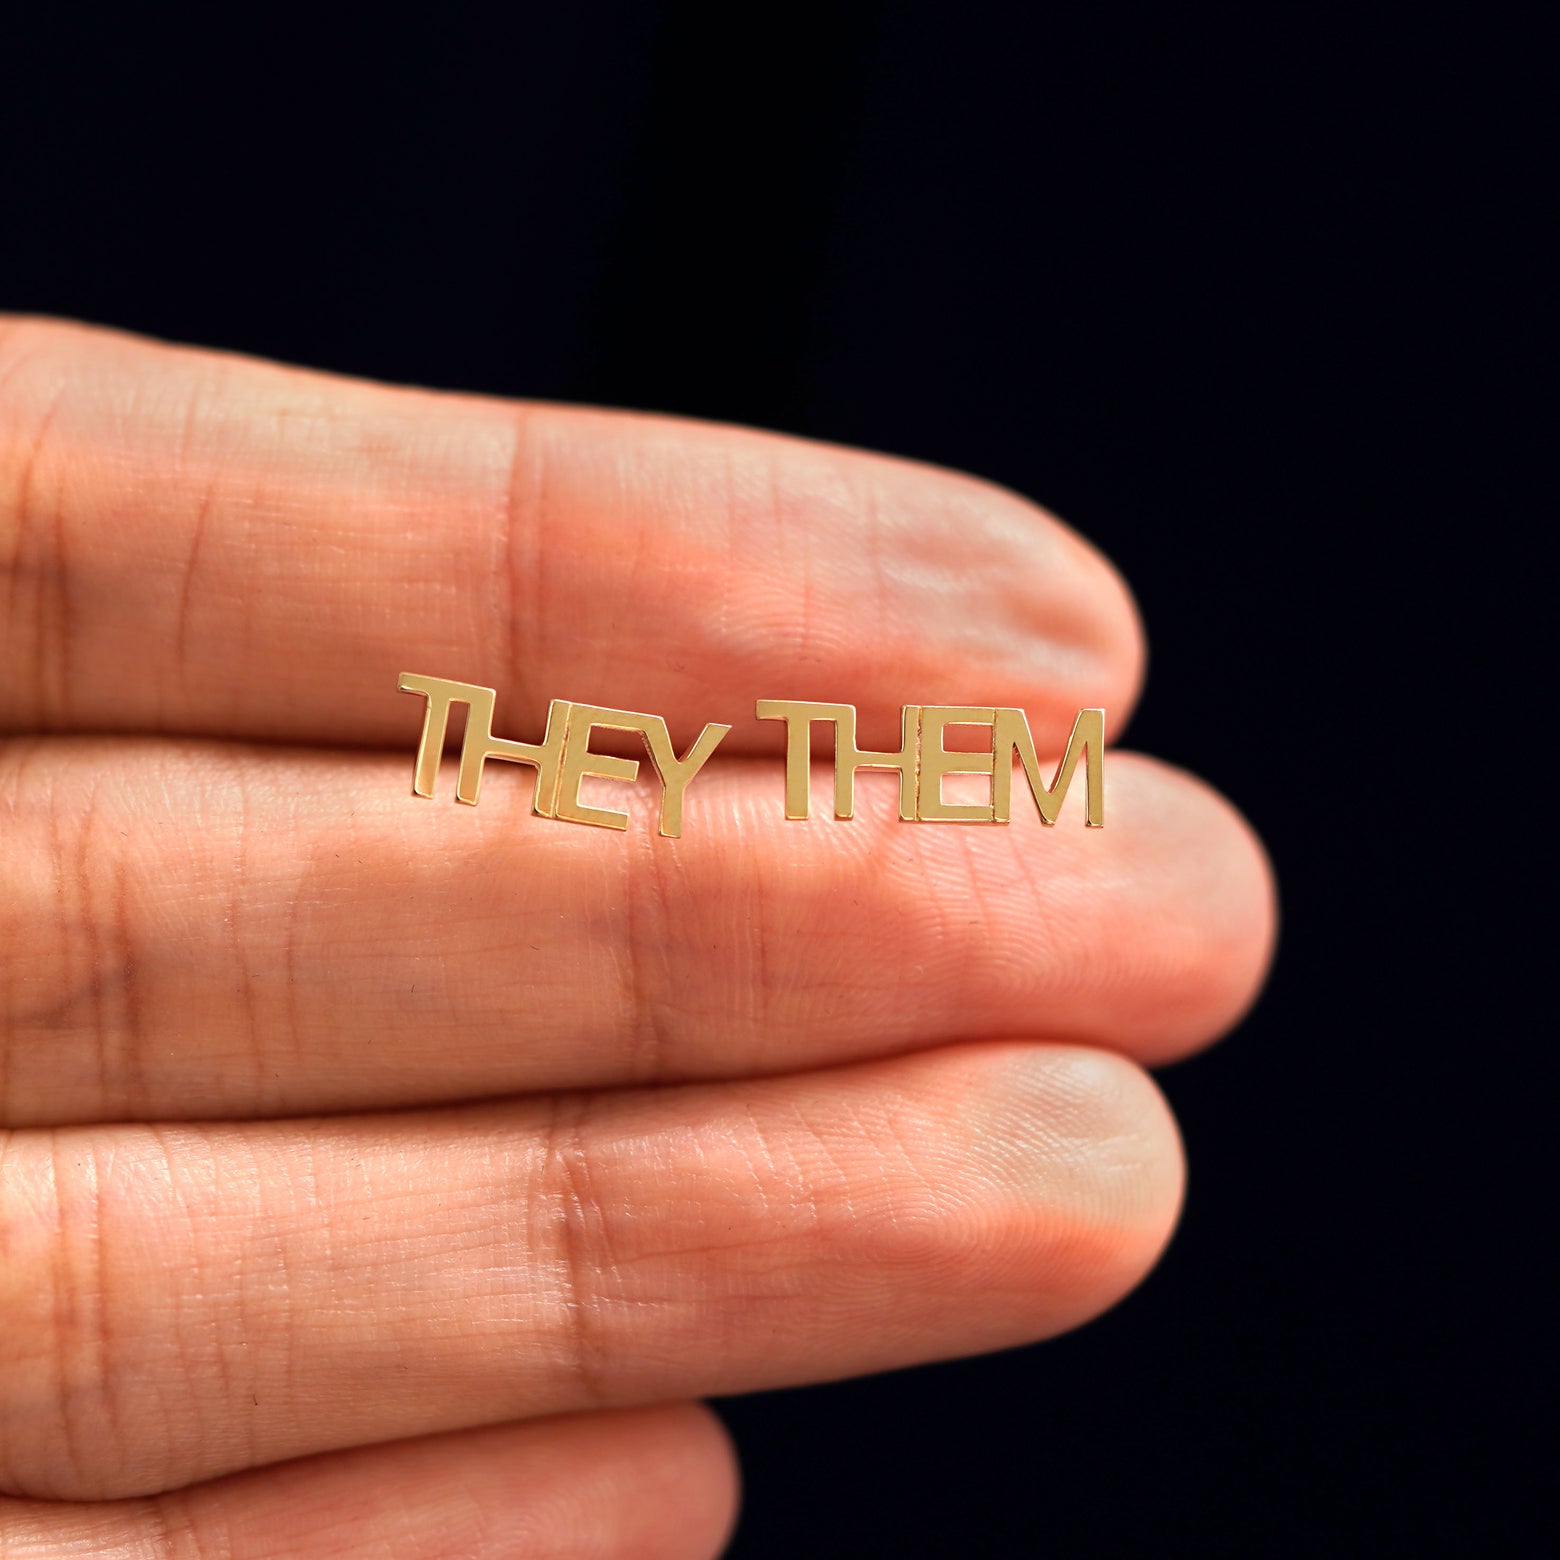 A pair 14k yellow gold They / Them Earring in between a model's fingers